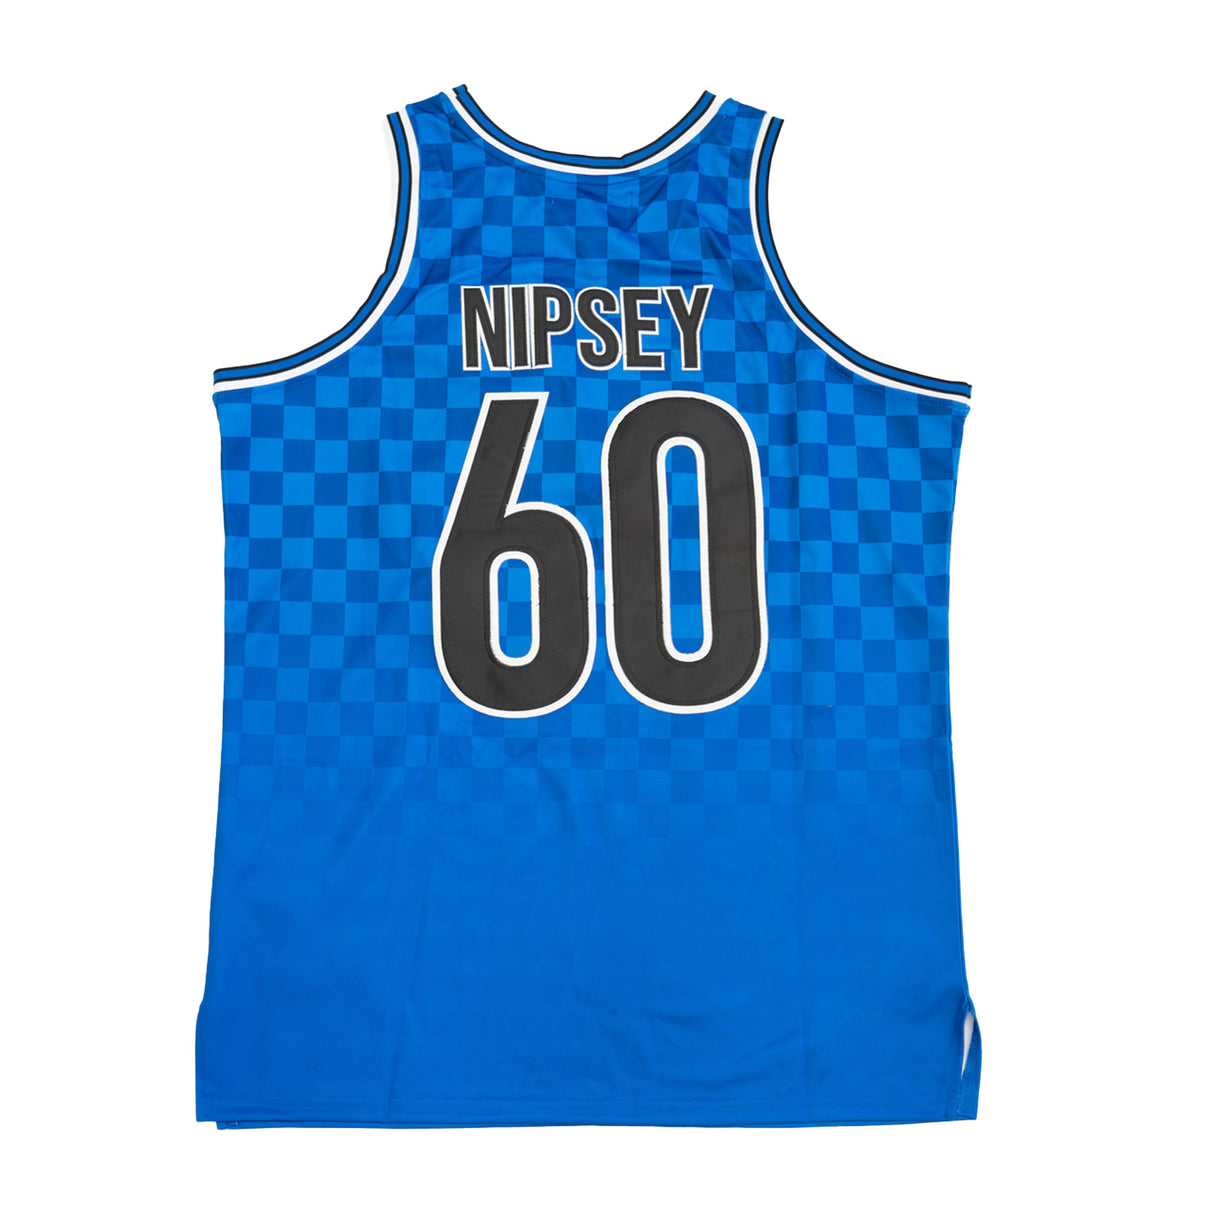 VICTORY LAP FLAGS BASKETBALL JERSEY (BLUE)